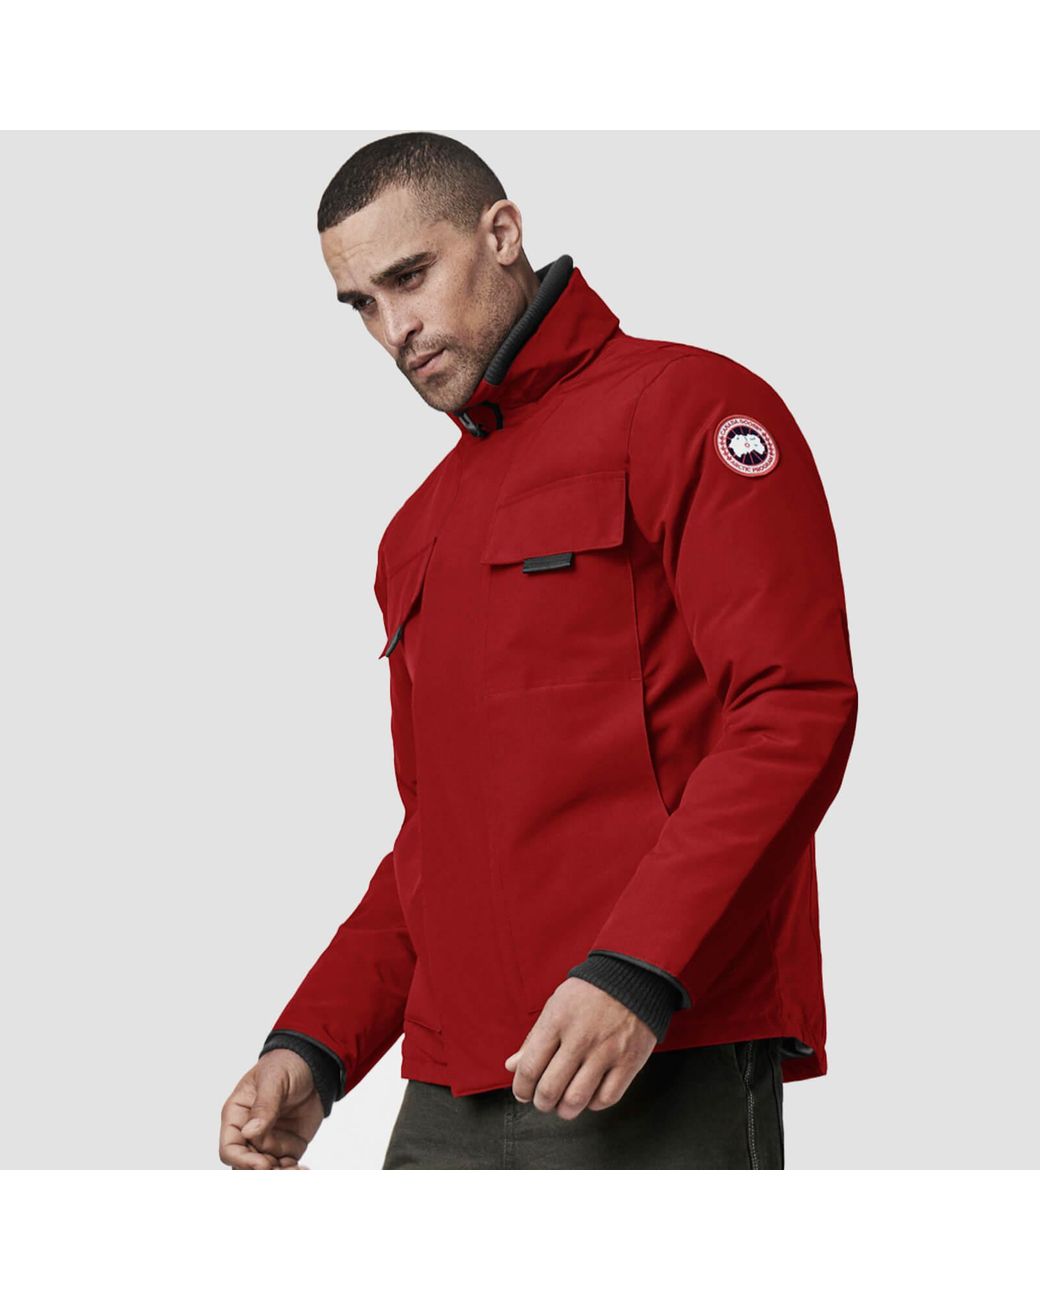 Canada Goose Goose Forester Jacket in Red for Men - Lyst